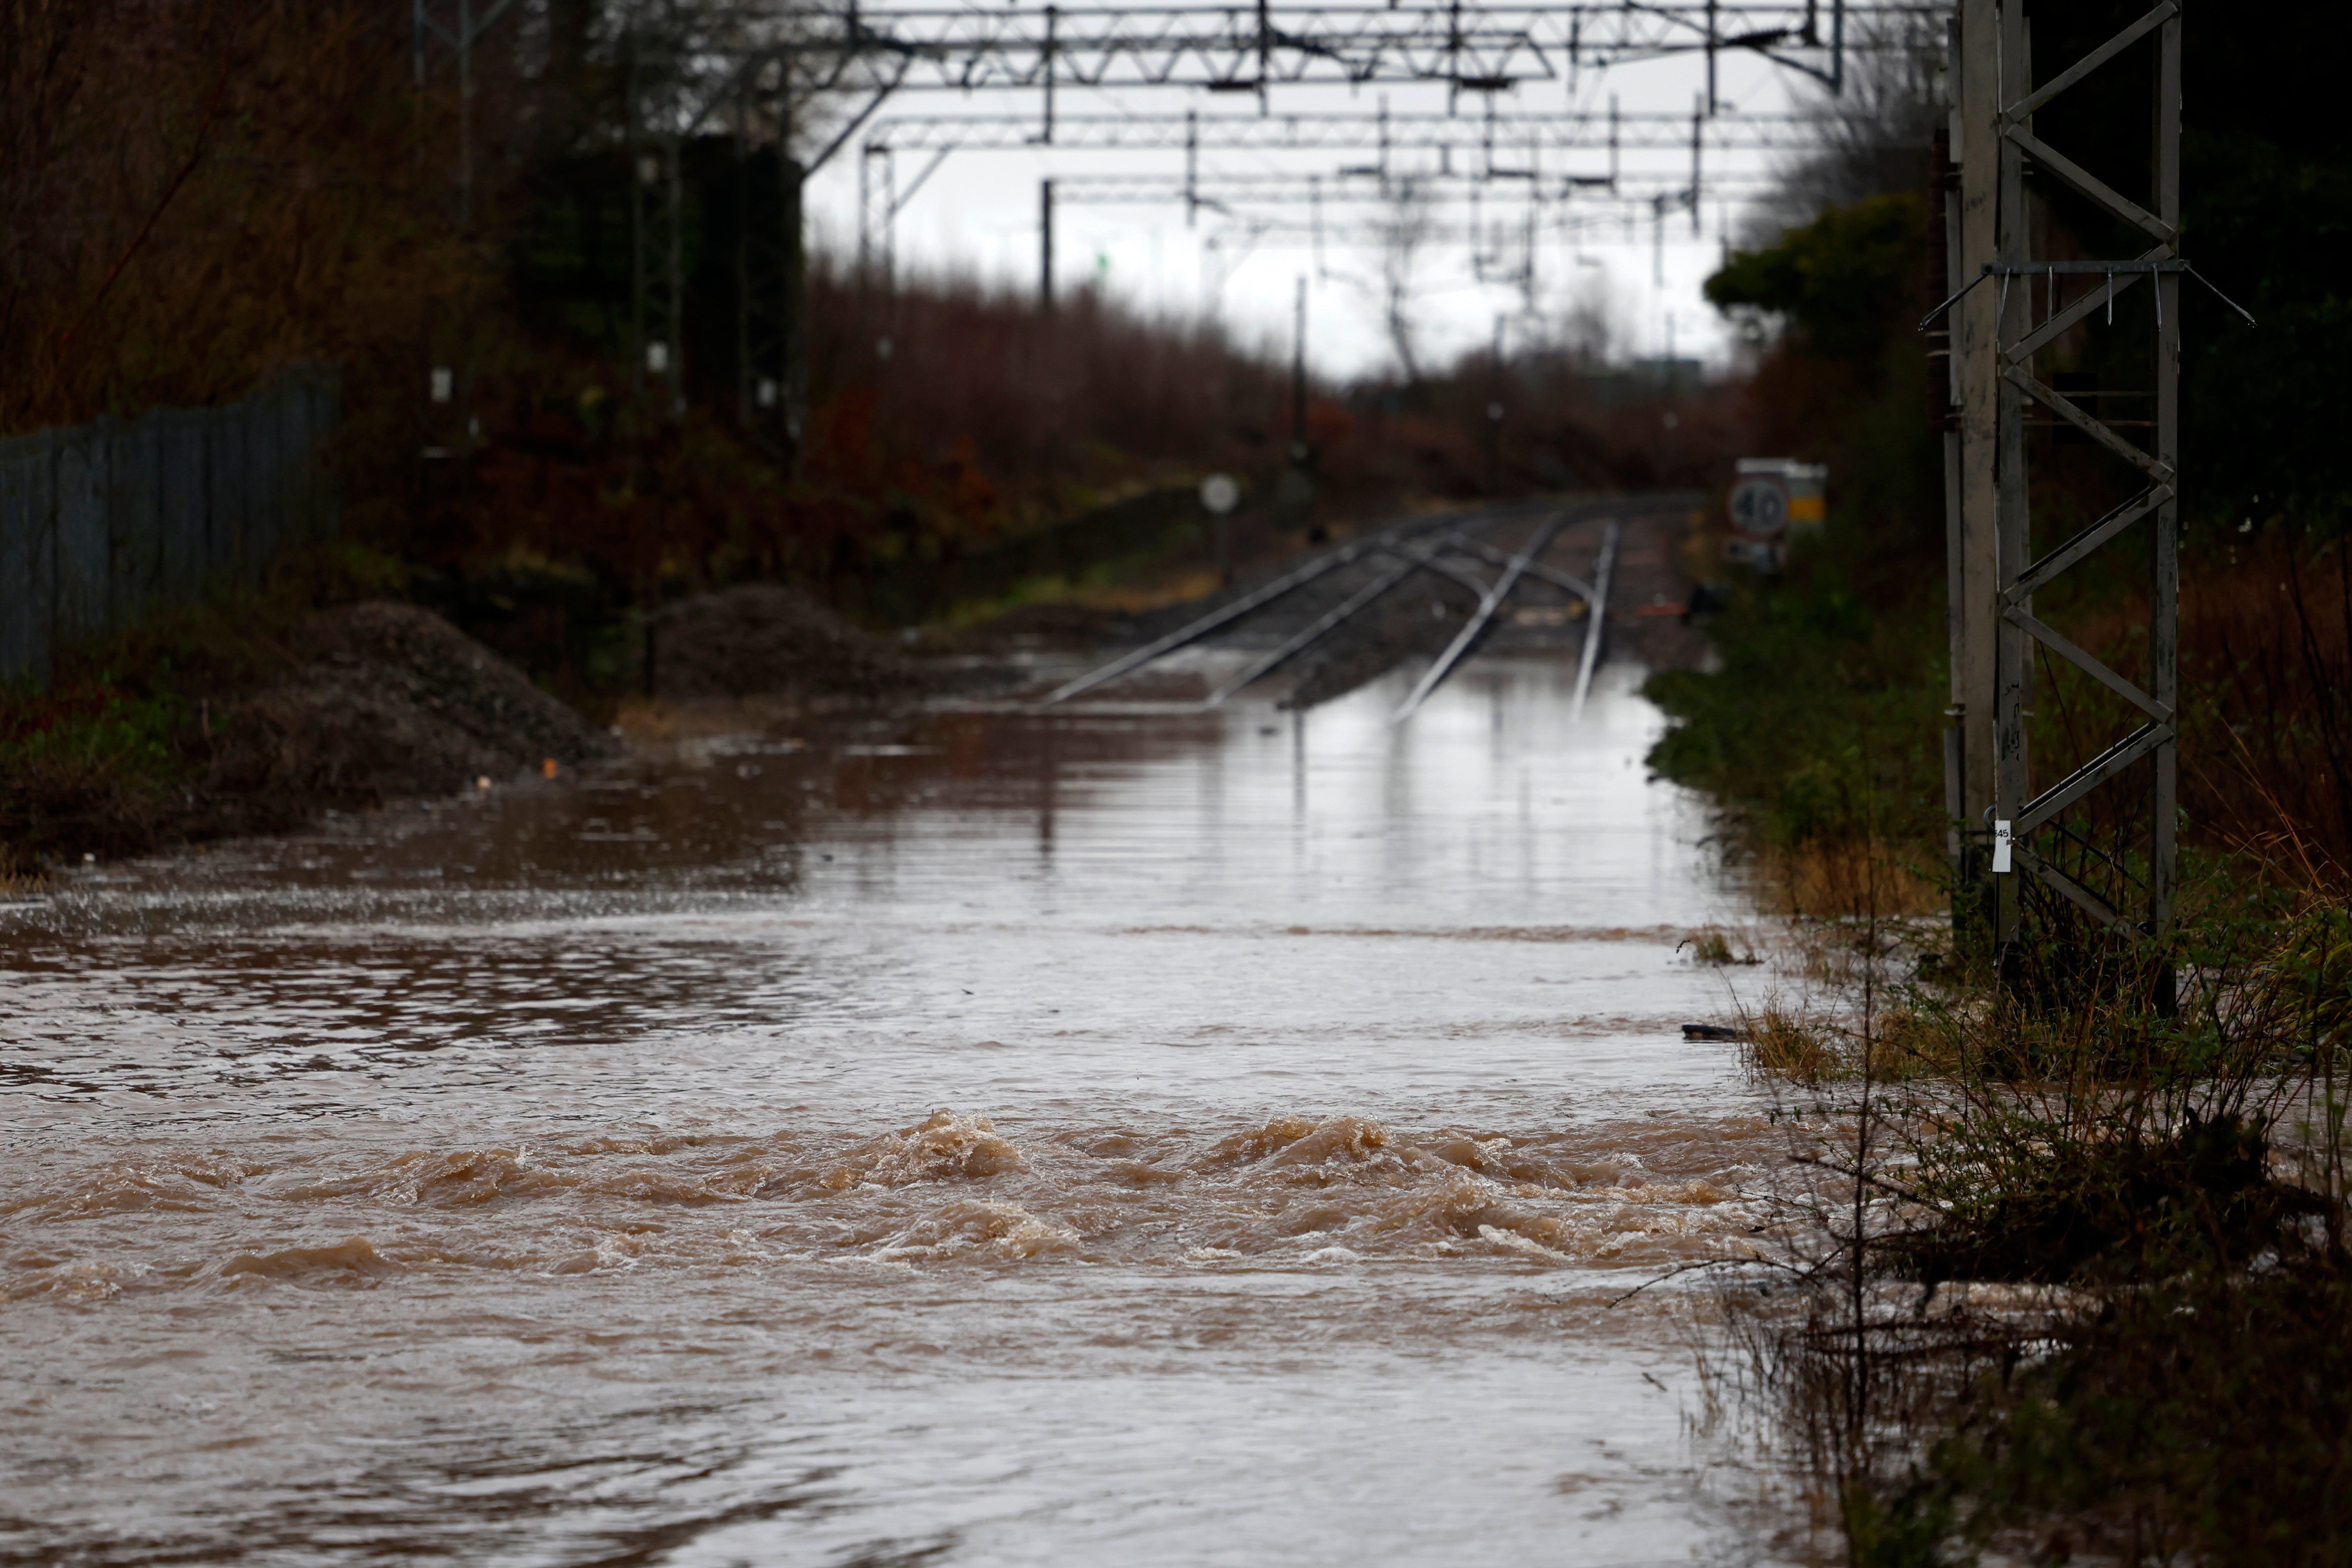 The railway line at Bowling station, West Dunbartonshire, was completely submerged